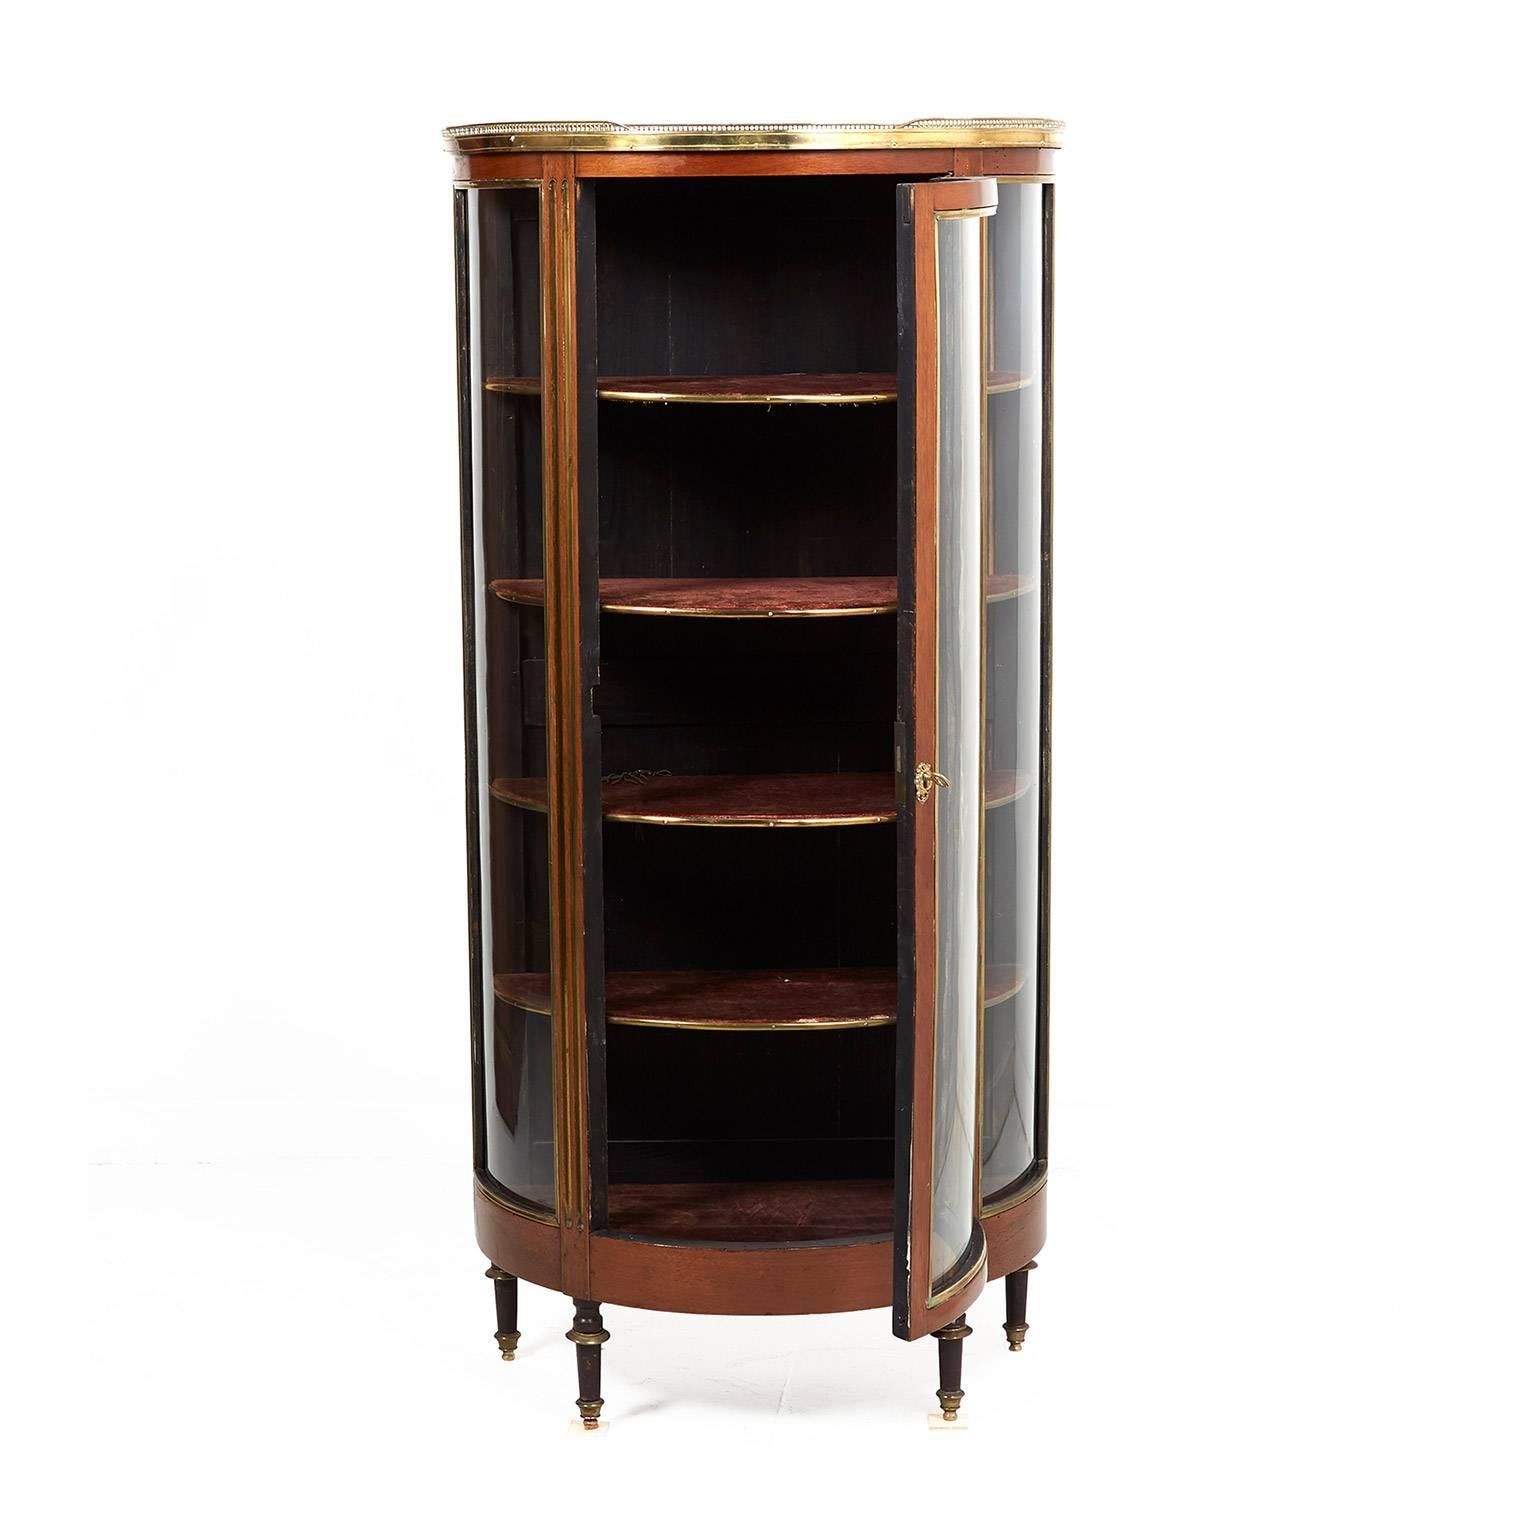 Antique Napoleon III mahogany demilune vitrine with brass trim, topped with contrasting light-coloured marble that’s surrounded by a delicate brass gallery. Versatile size makes it ideal for many different locations in your home, circa